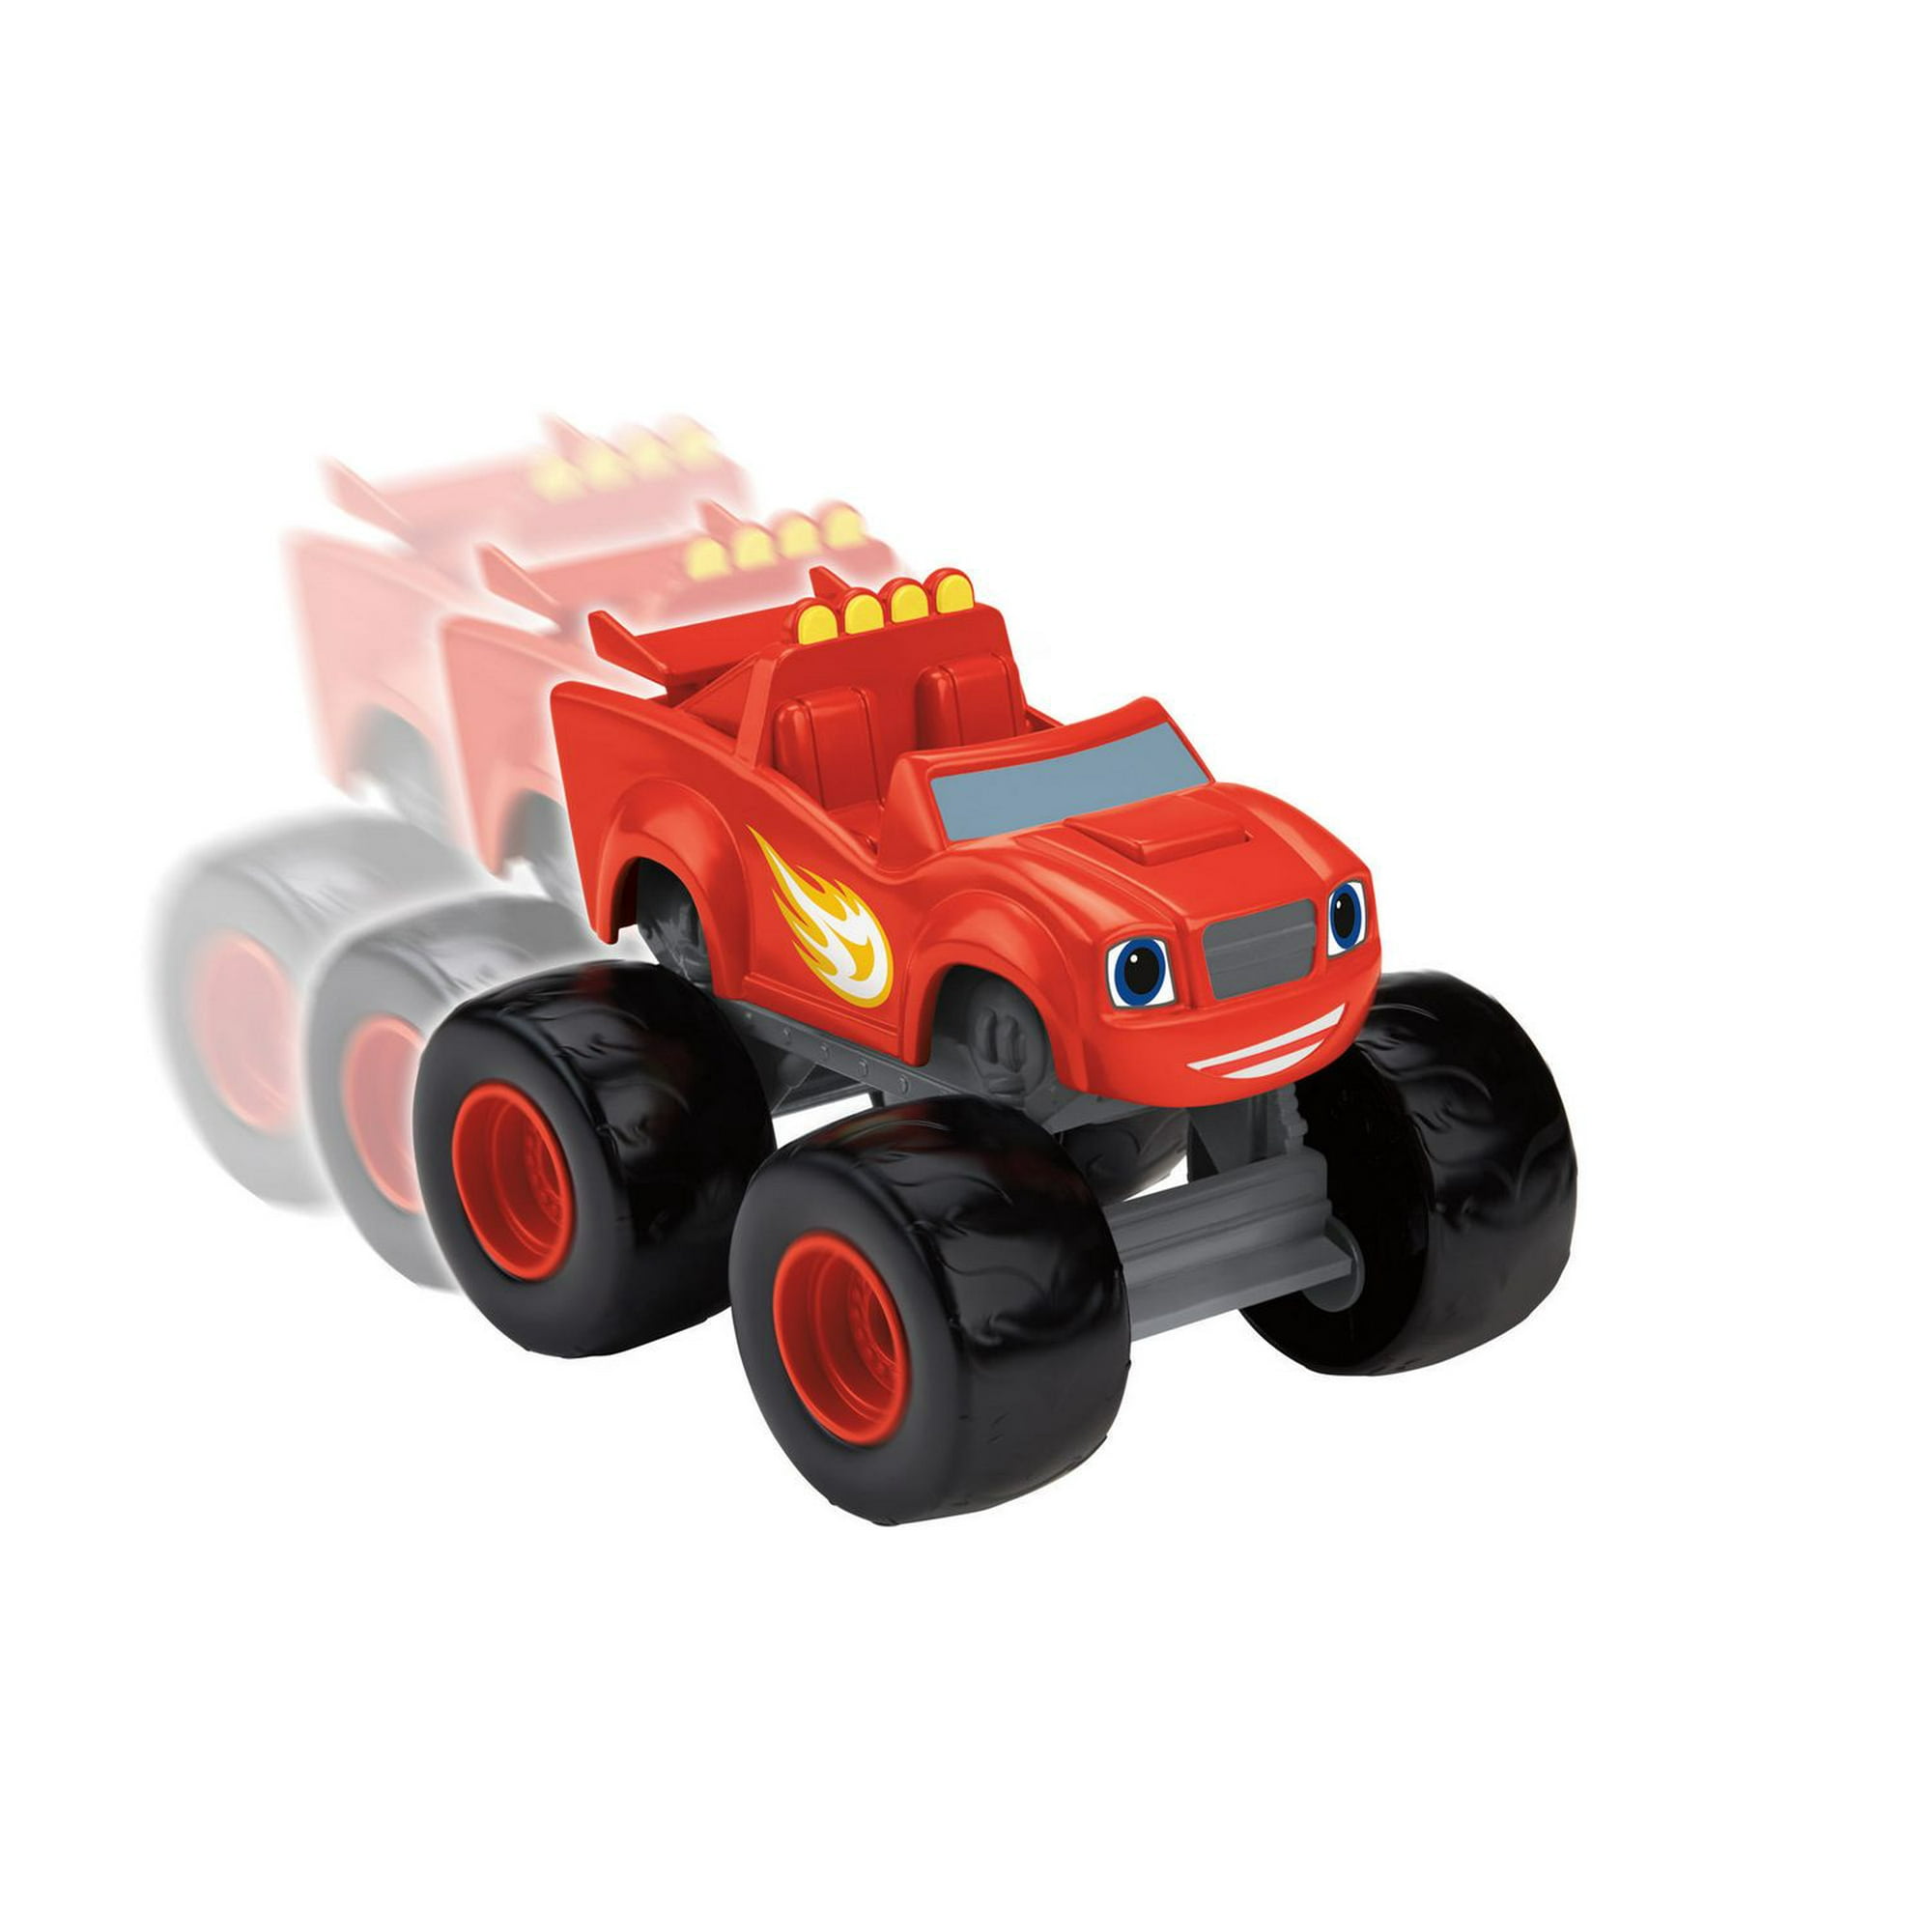  Blaze and the Monster Machines Boys' Toddler 100